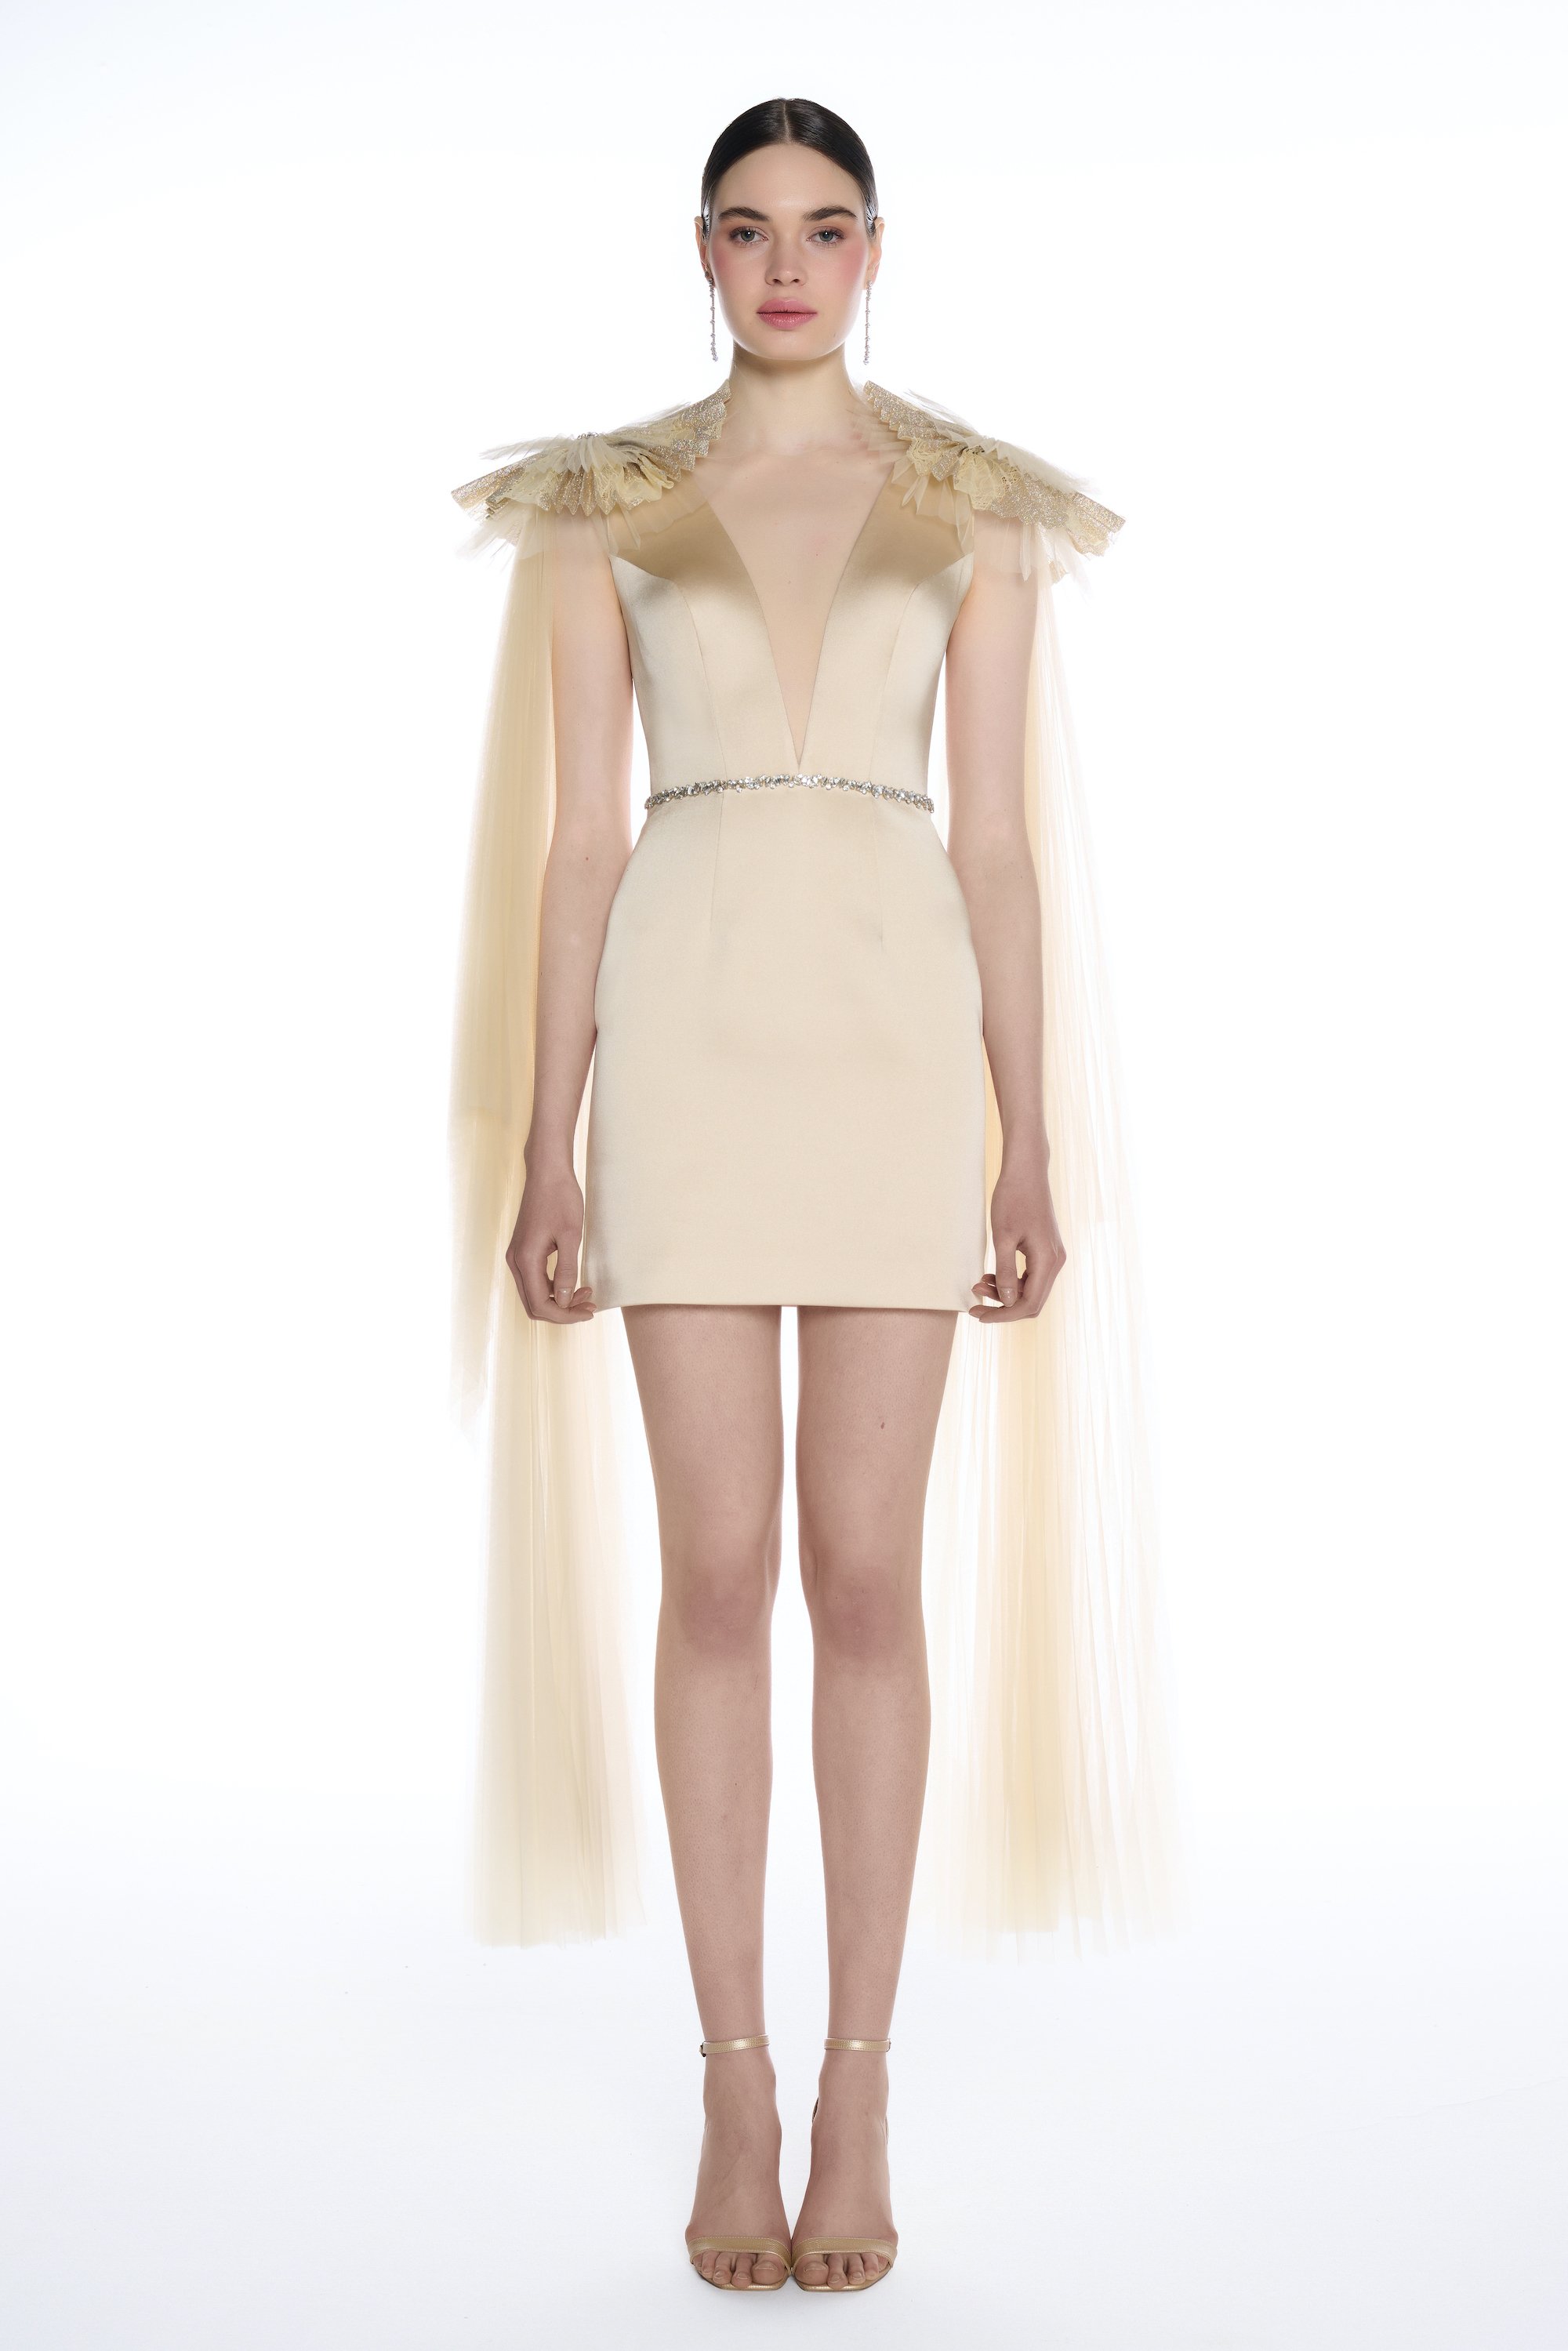 R36 - Deep V-Neckline, Puffed Shoulders, Waist Adorned with Stone Embroidery, Mini Dress